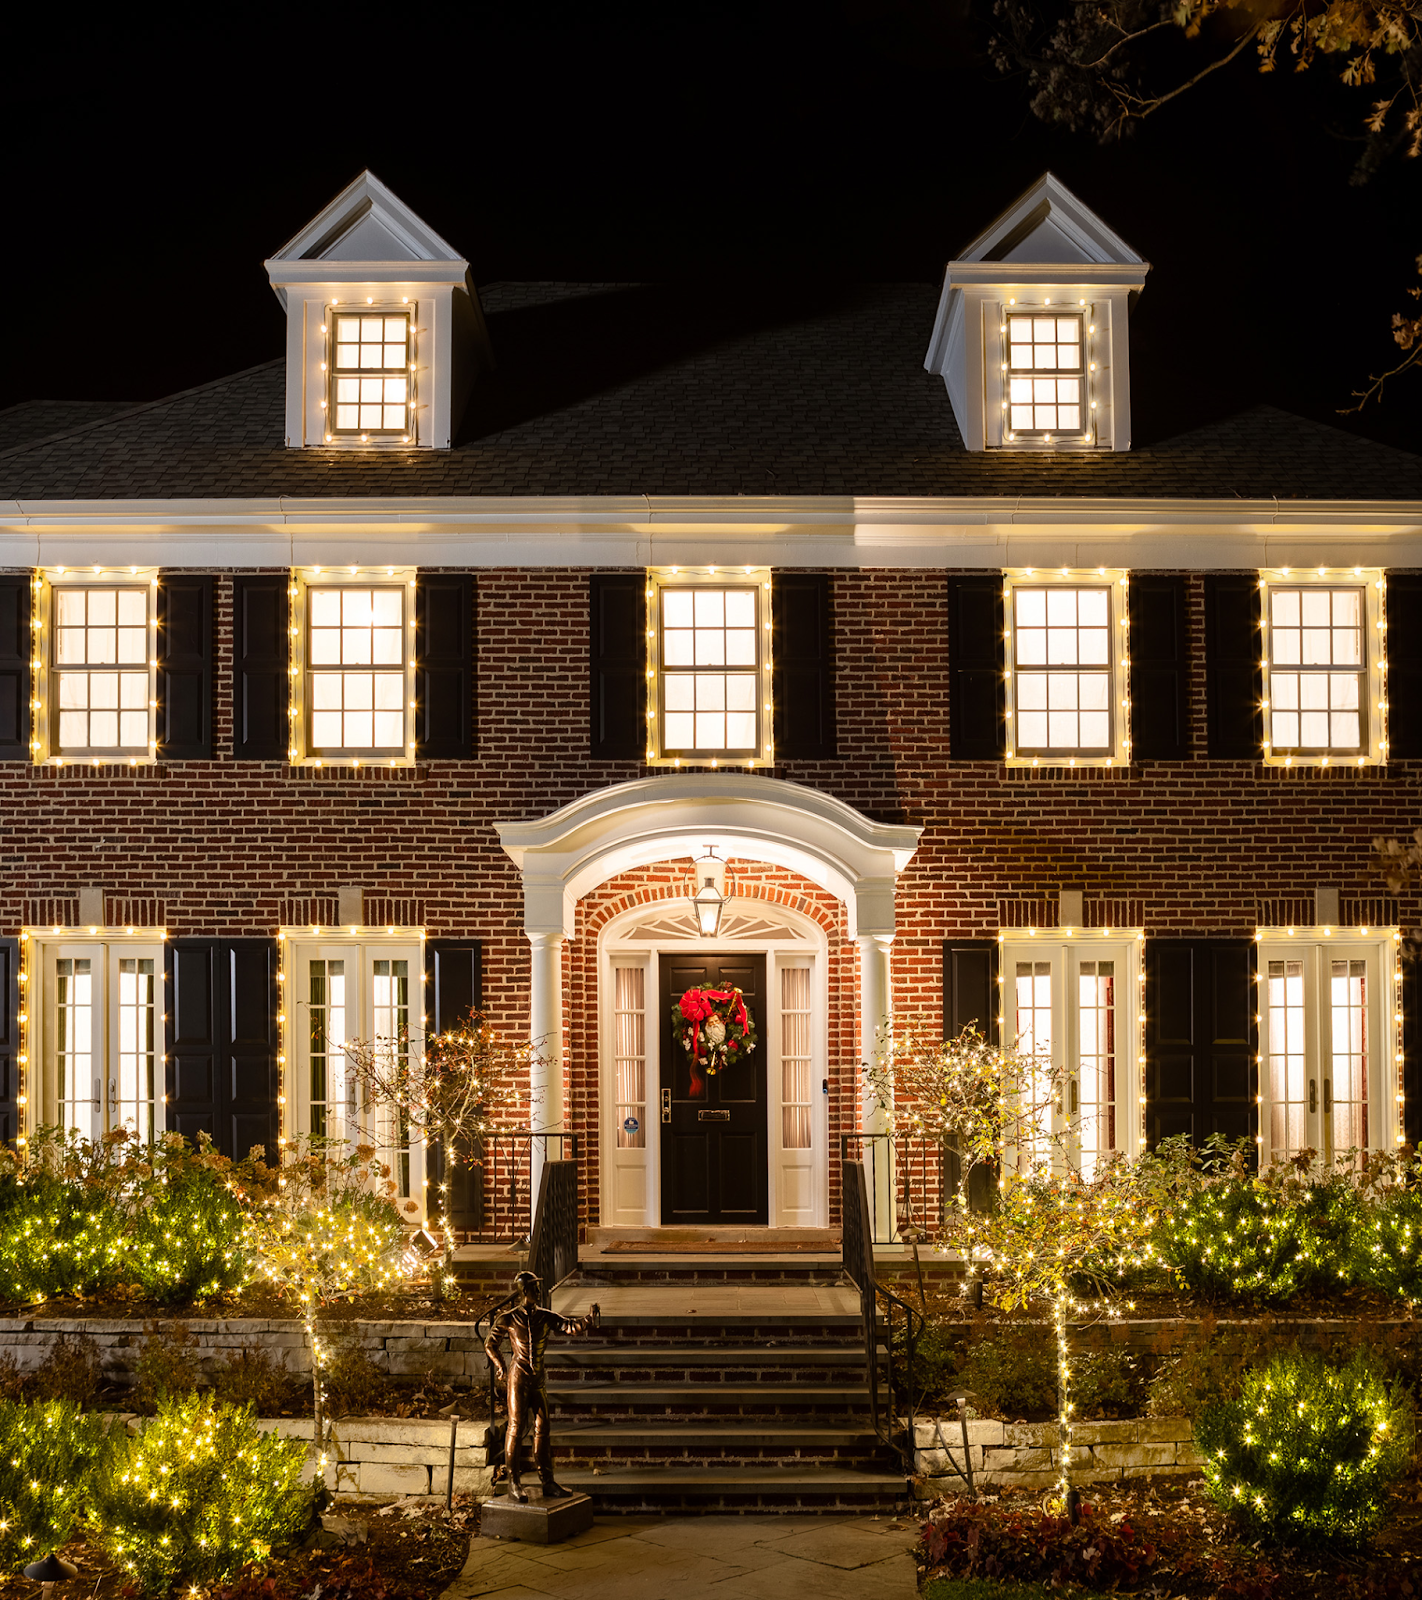 The "Home Alone" house is available for booking on Airbnb